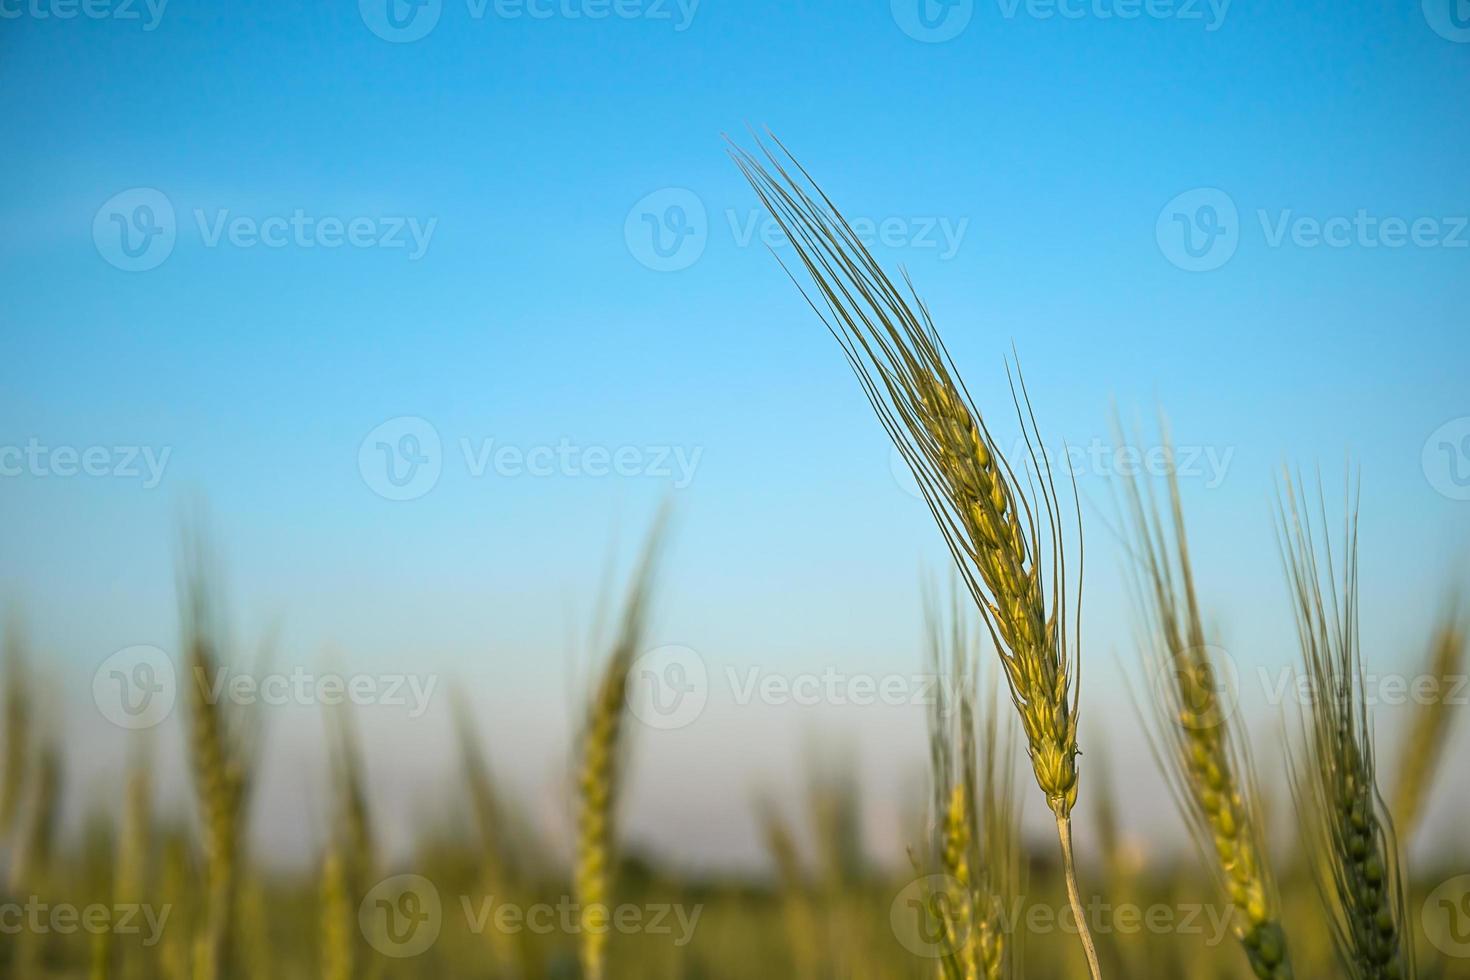 Image of  barley corns growing in a field photo